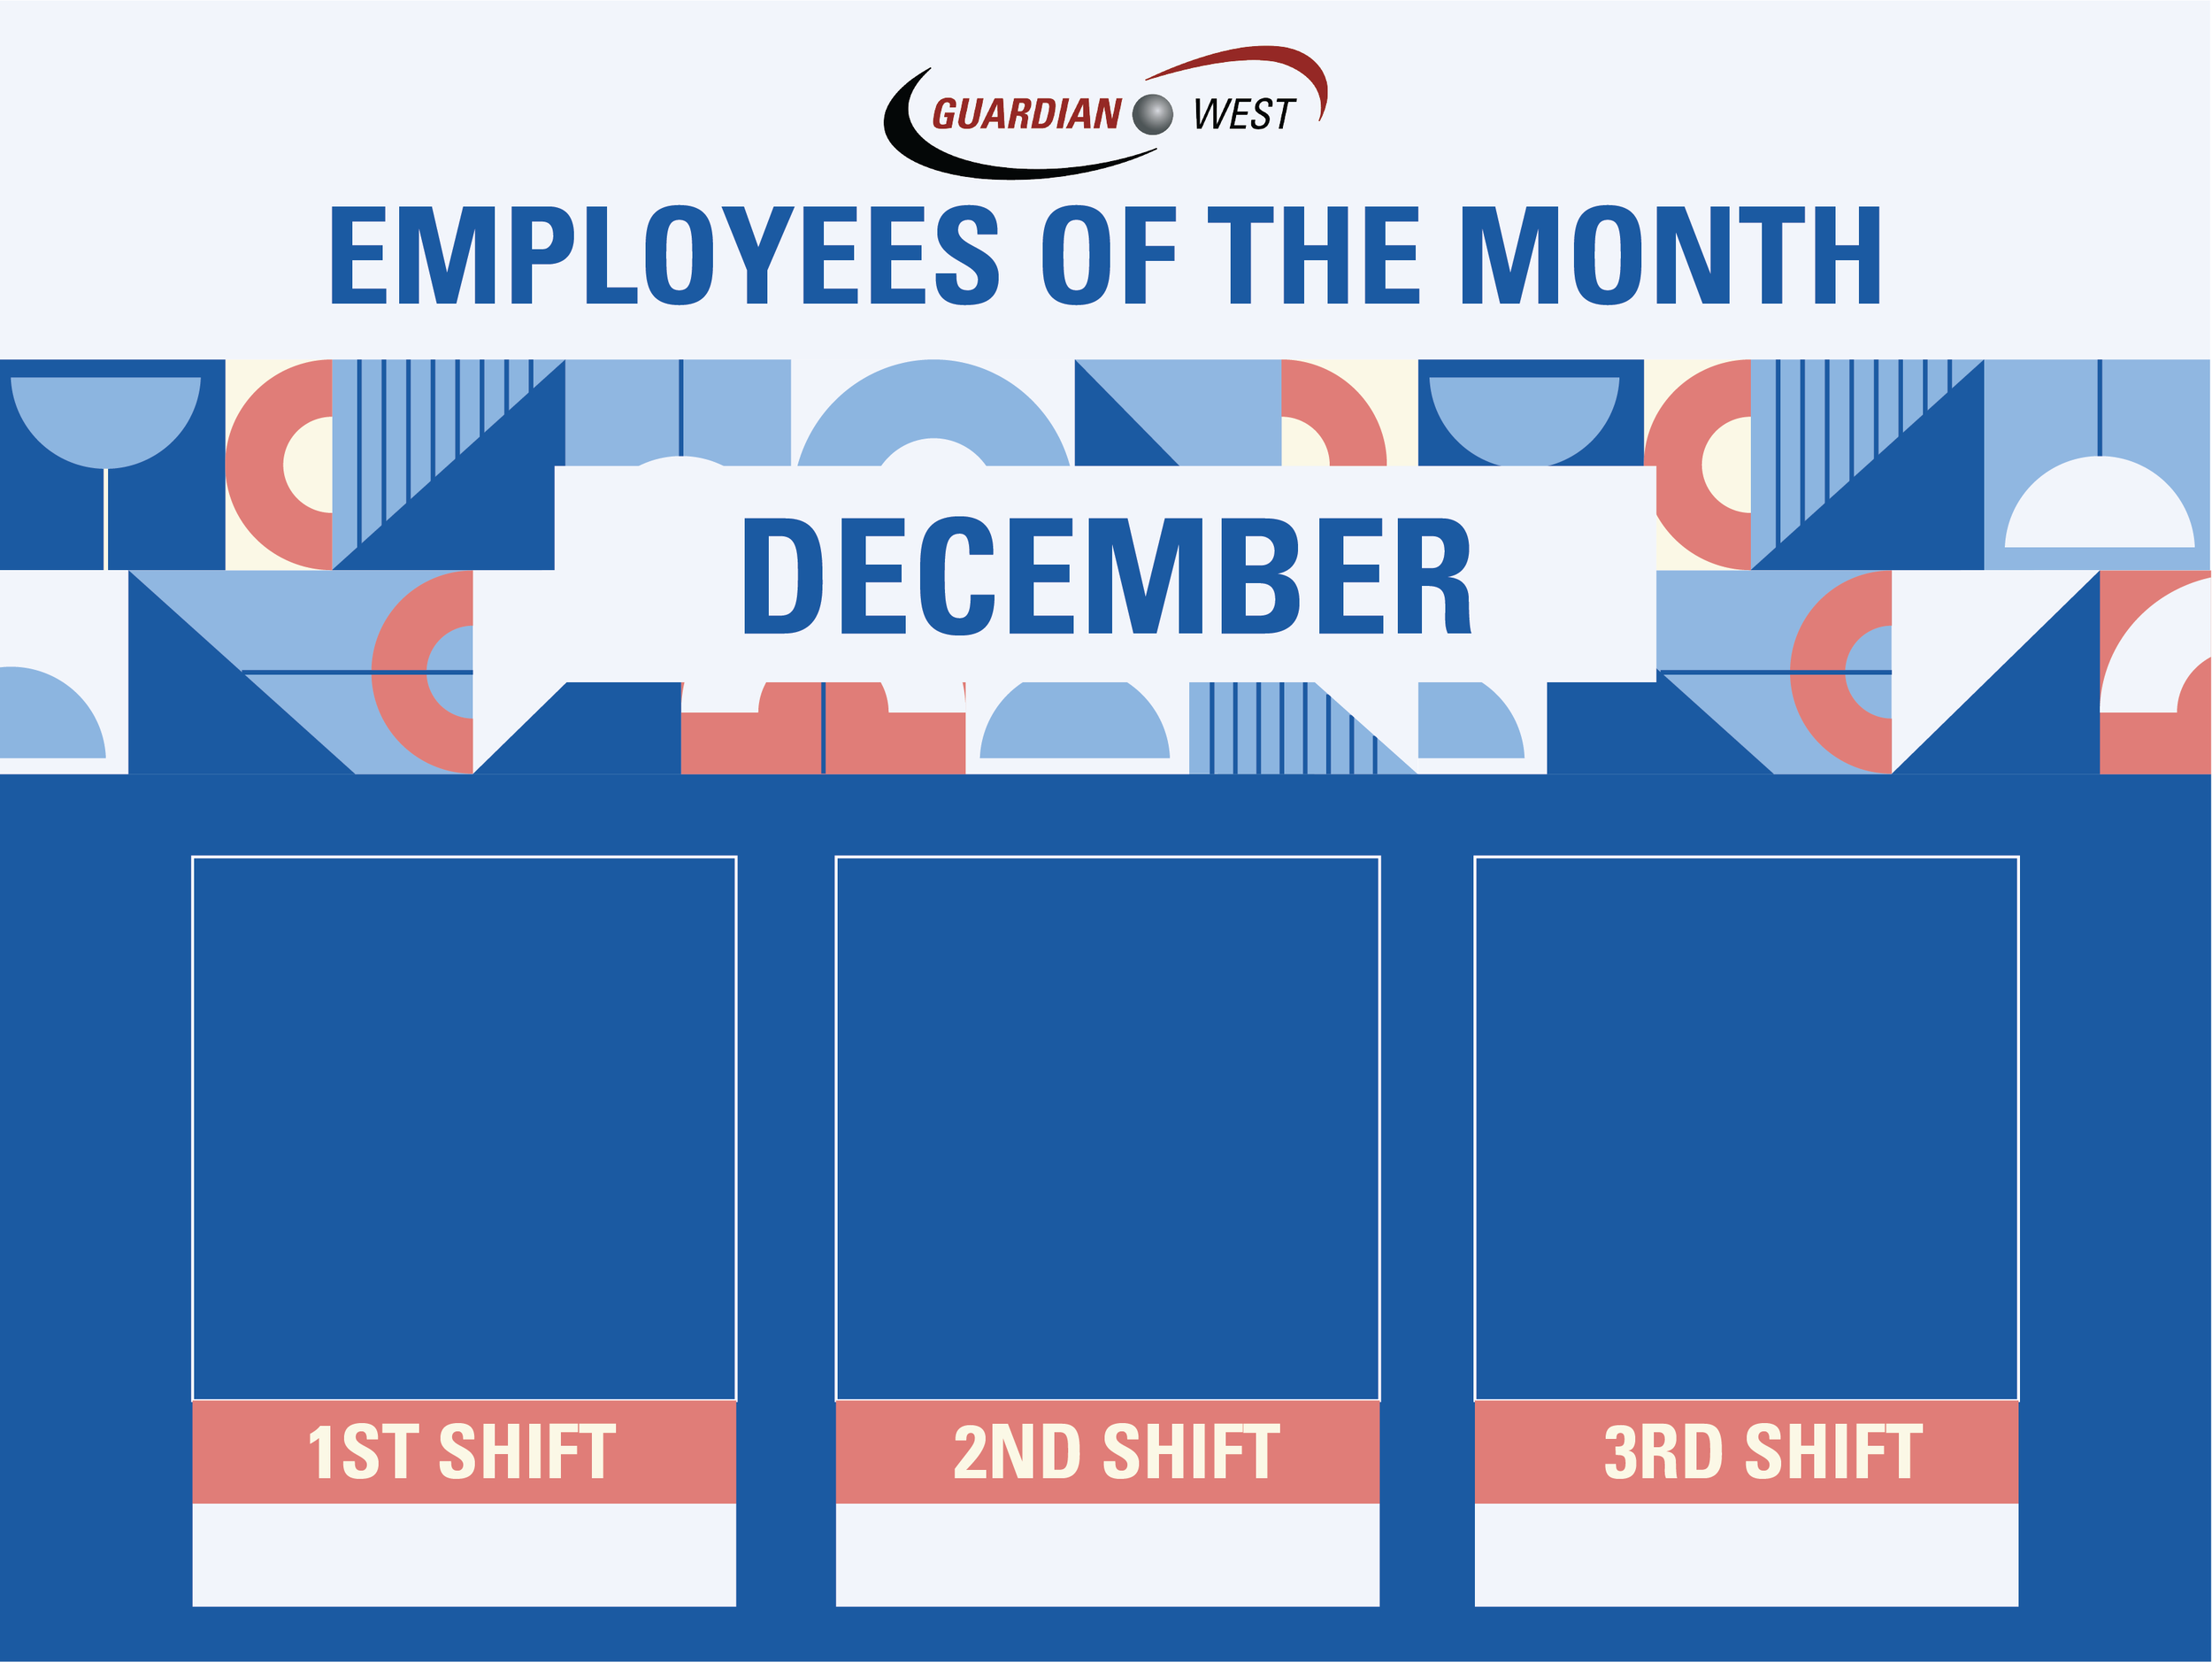 GW_Employee of the month2-12.png